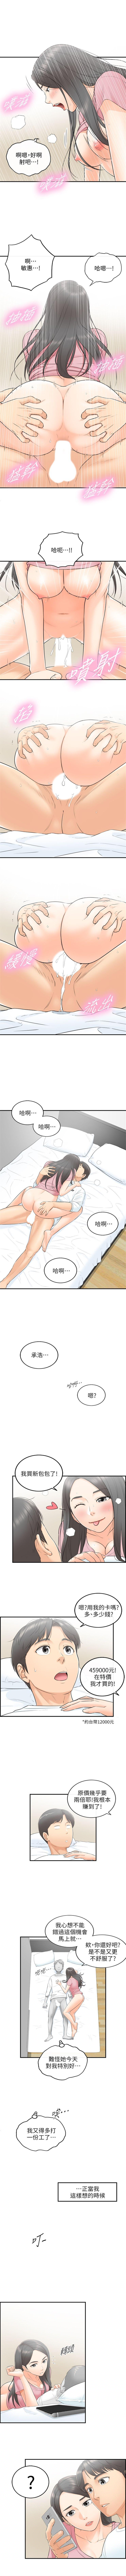 Gayclips 正妹小主管 1-54 官方中文（連載中） Smooth - Page 7